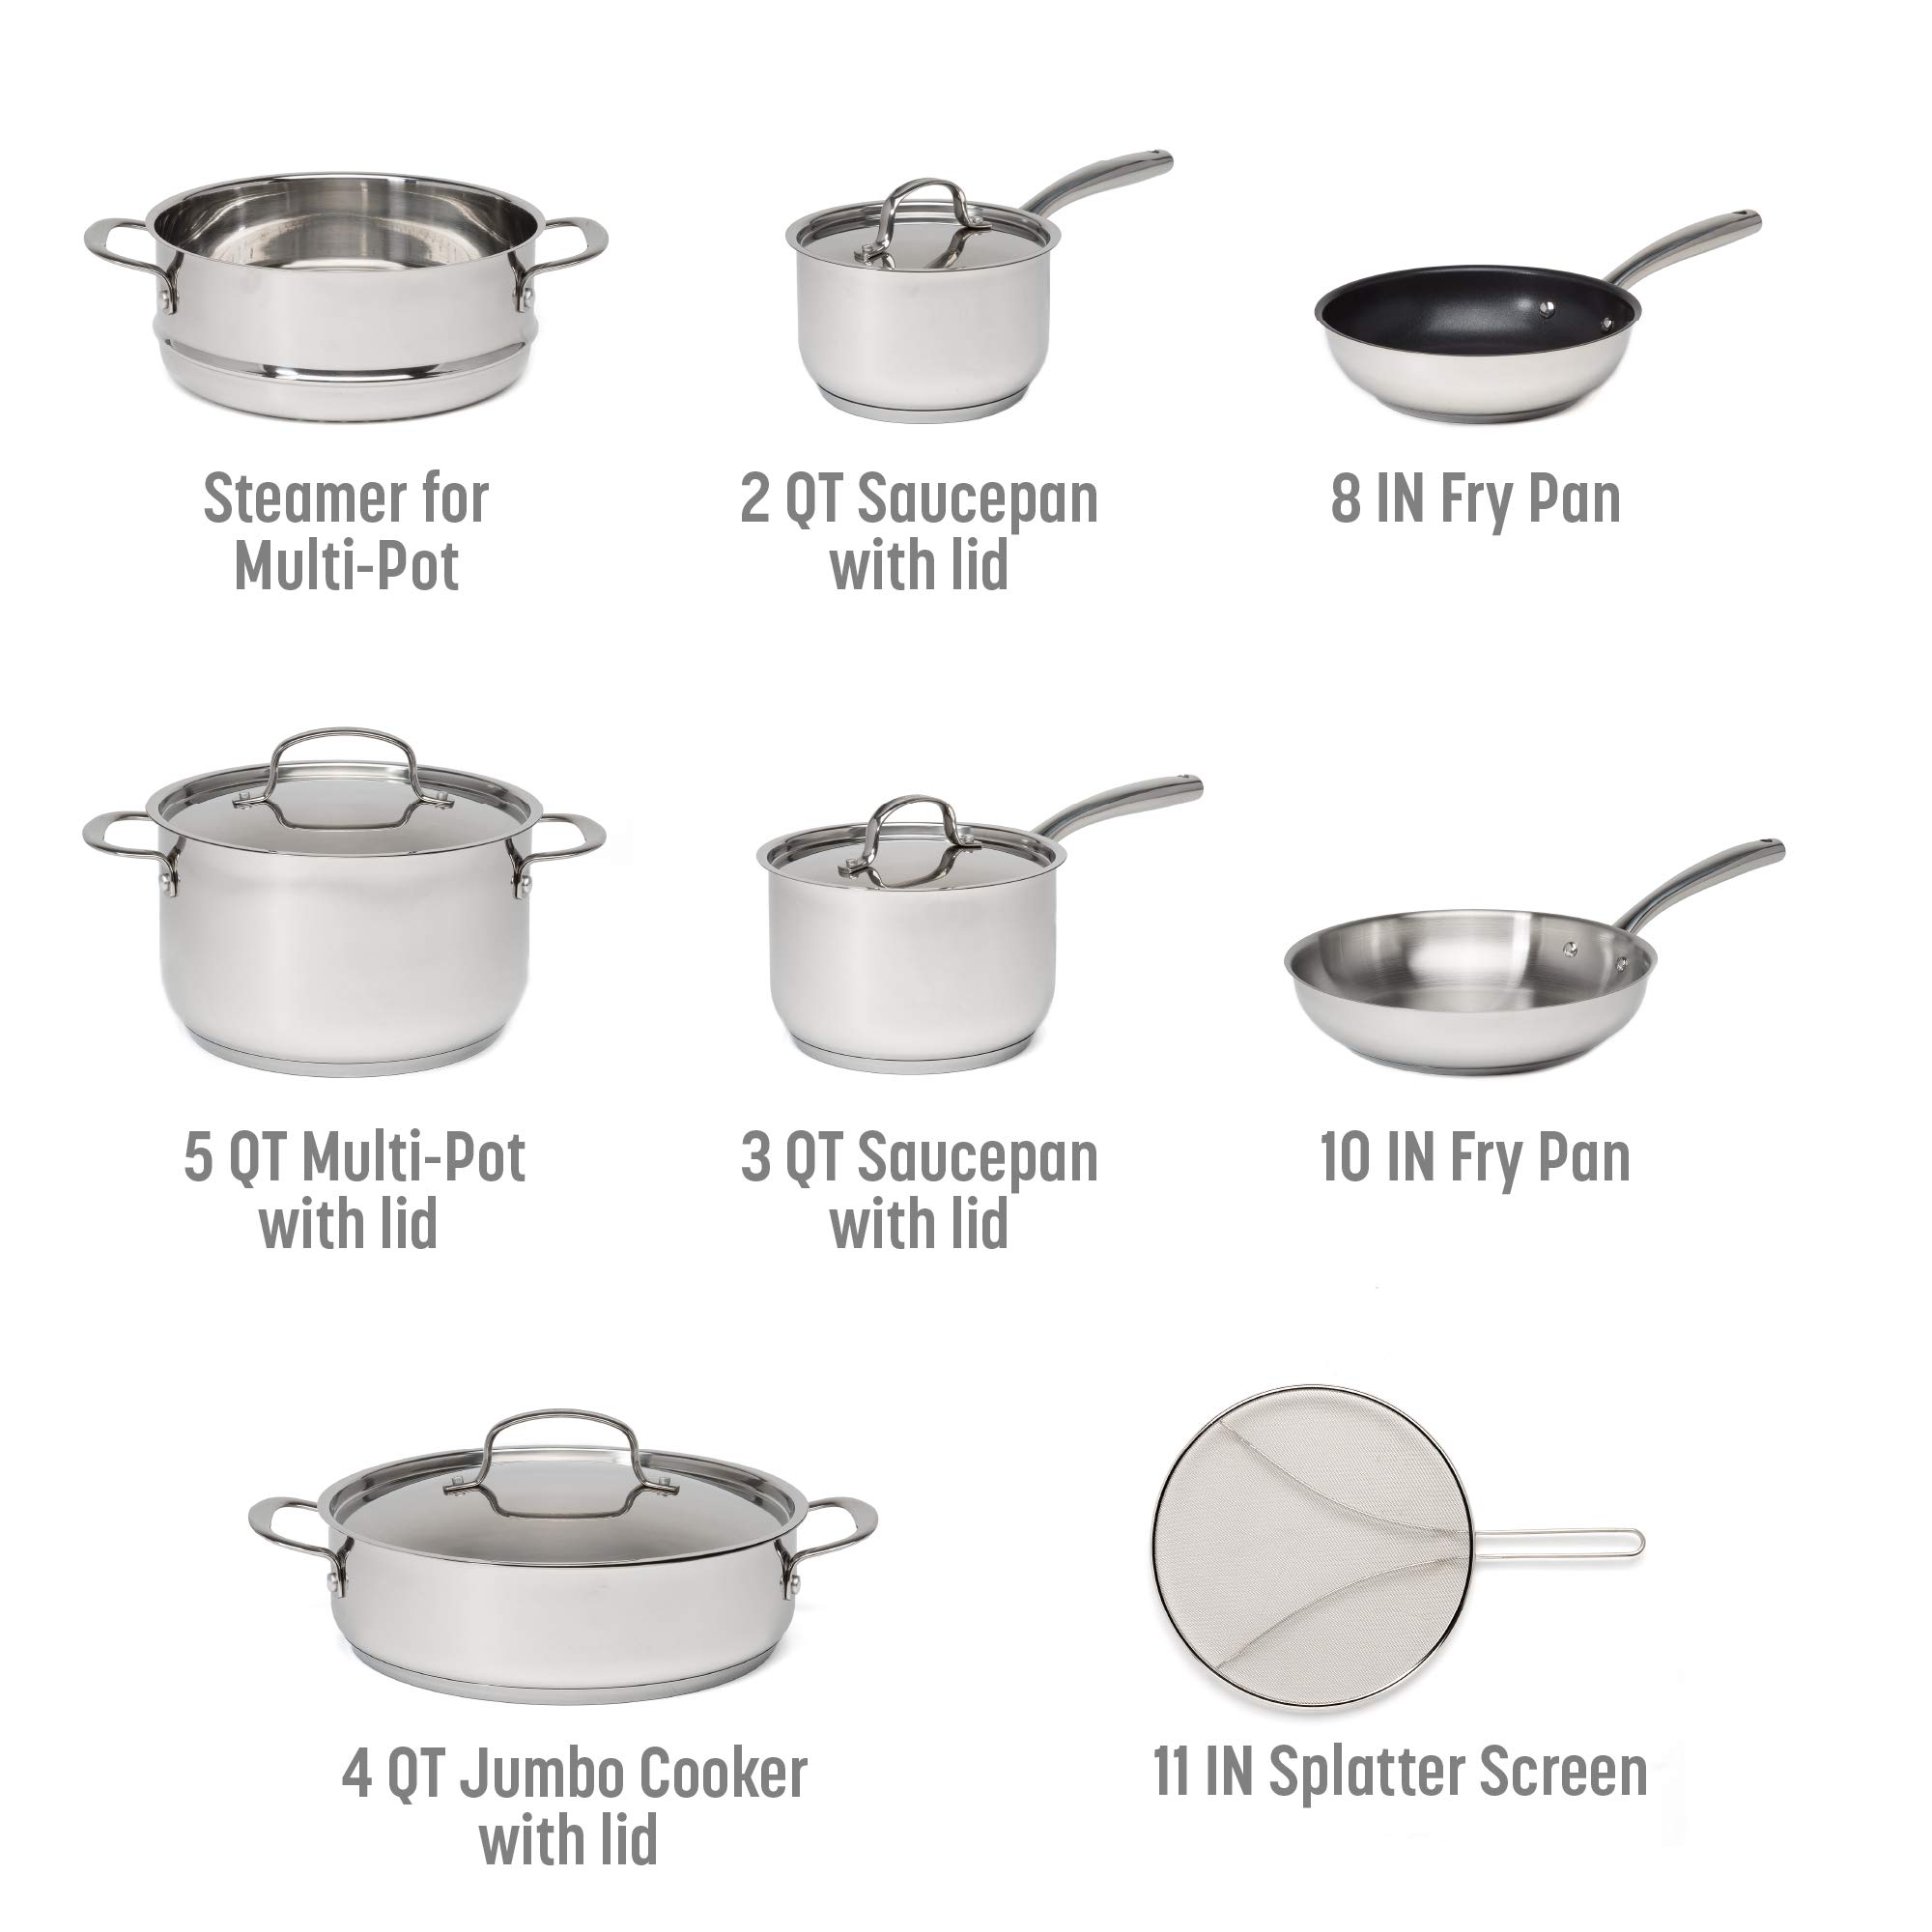 Goodful 12-Piece Classic Stainless Steel Cookware Set with Tri-Ply Base for Even Heating, Durable, Impact Bonded Pots and Pans, Dishwasher Safe Includes Non Stick Frying Pan, Chrome